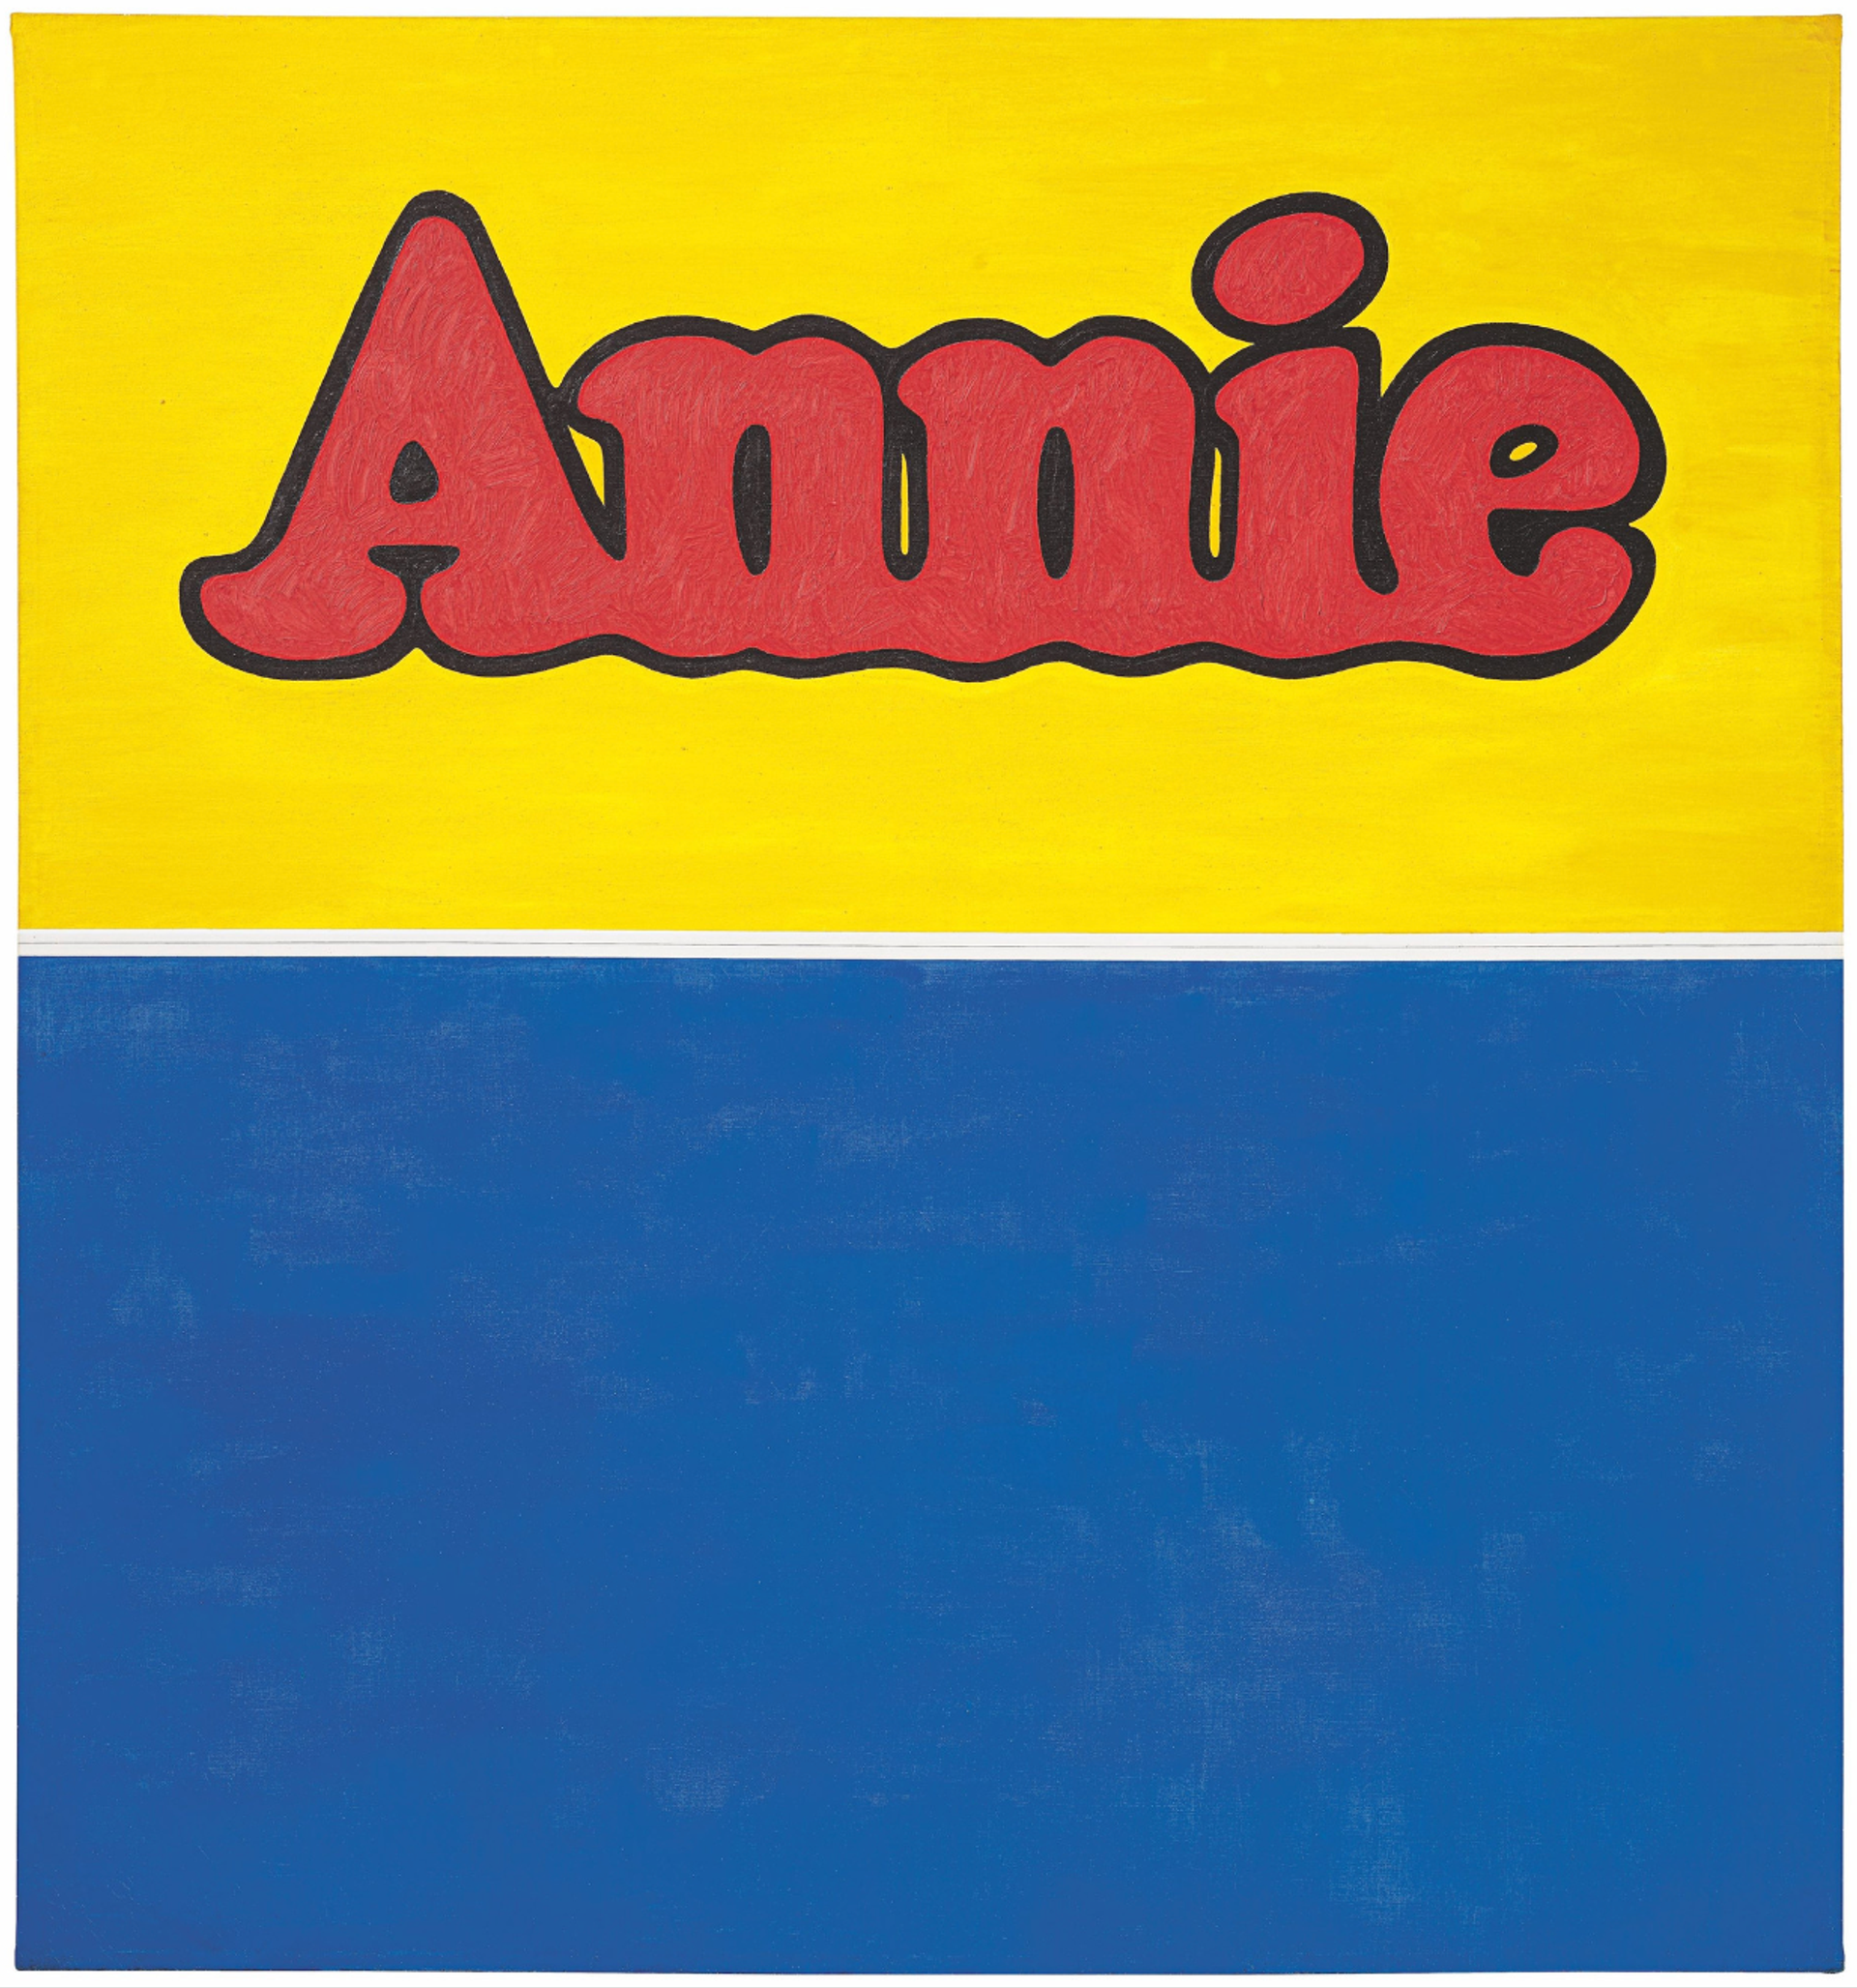 Painting by Ruscha depicting the name 'Annie' against with a stark, contrasting colour scheme that splits the canvas into two distinct halves. The top features the word in bright red against a yellow backdrop, while the bottom immerses the viewer in a deep blue.